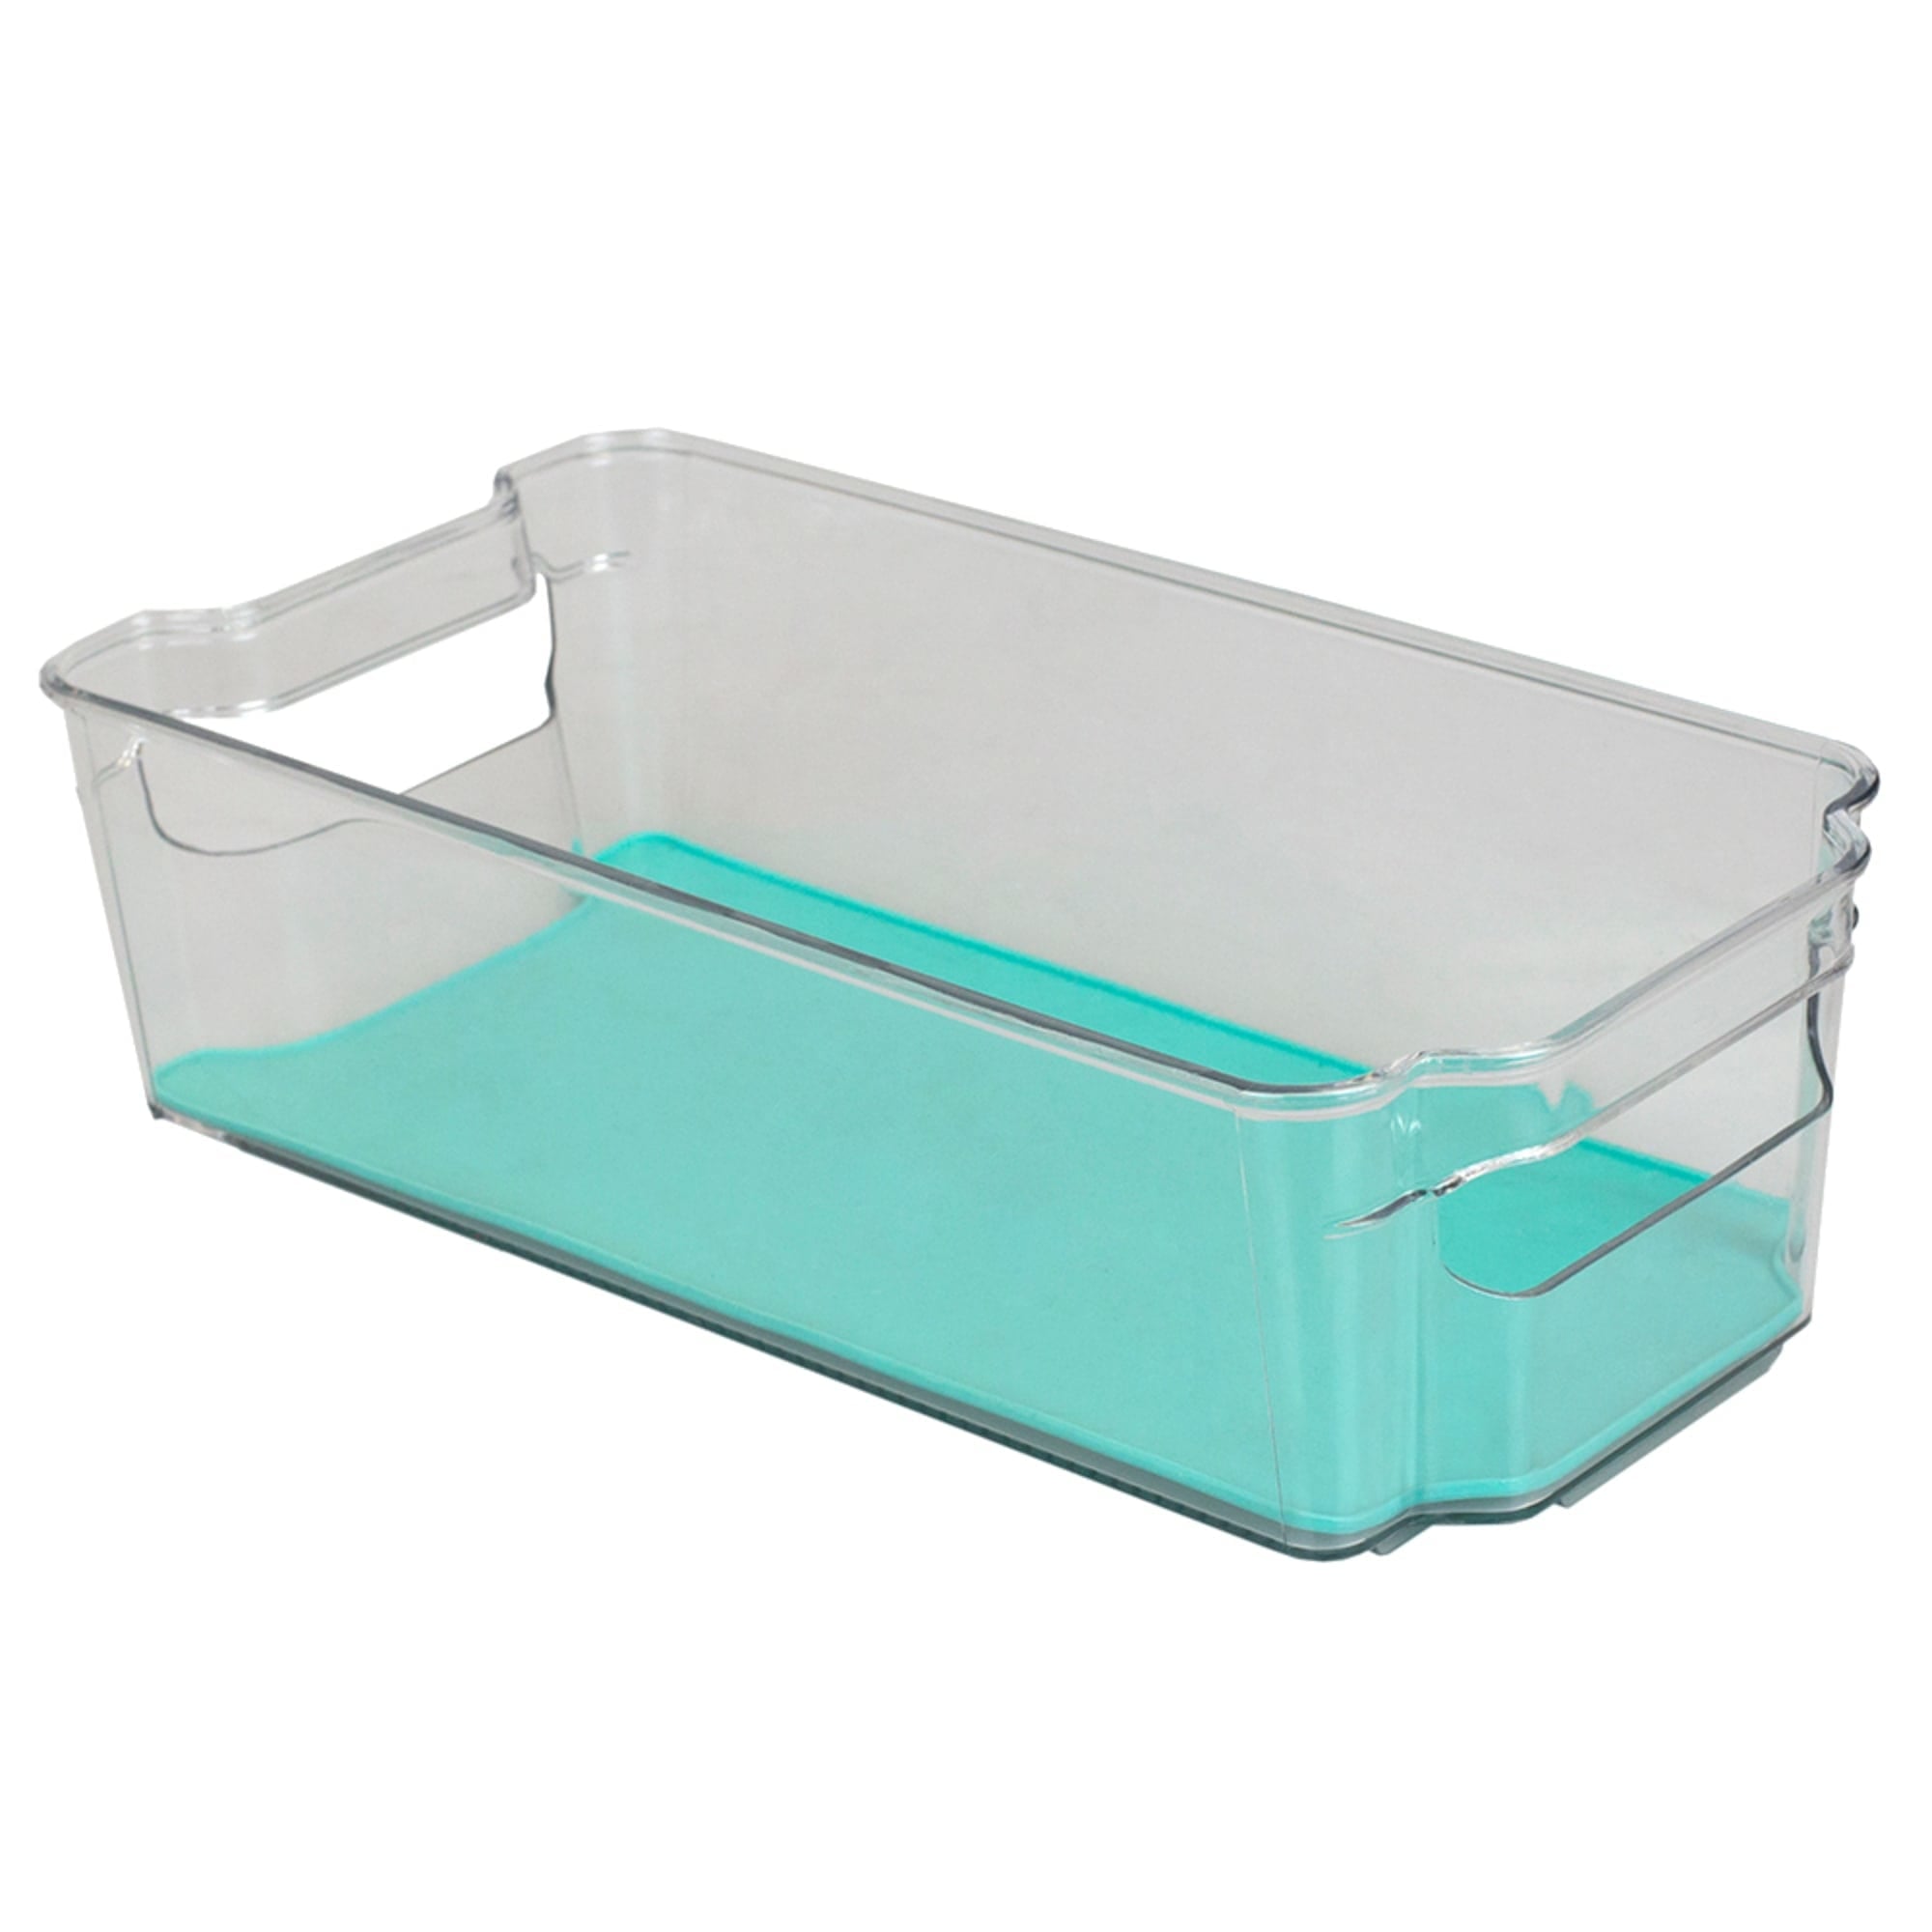 Home Basics 6" x 15" Multi-Purpose Plastic Fridge Bin with Rubber Lining, Turquoise $4 EACH, CASE PACK OF 12